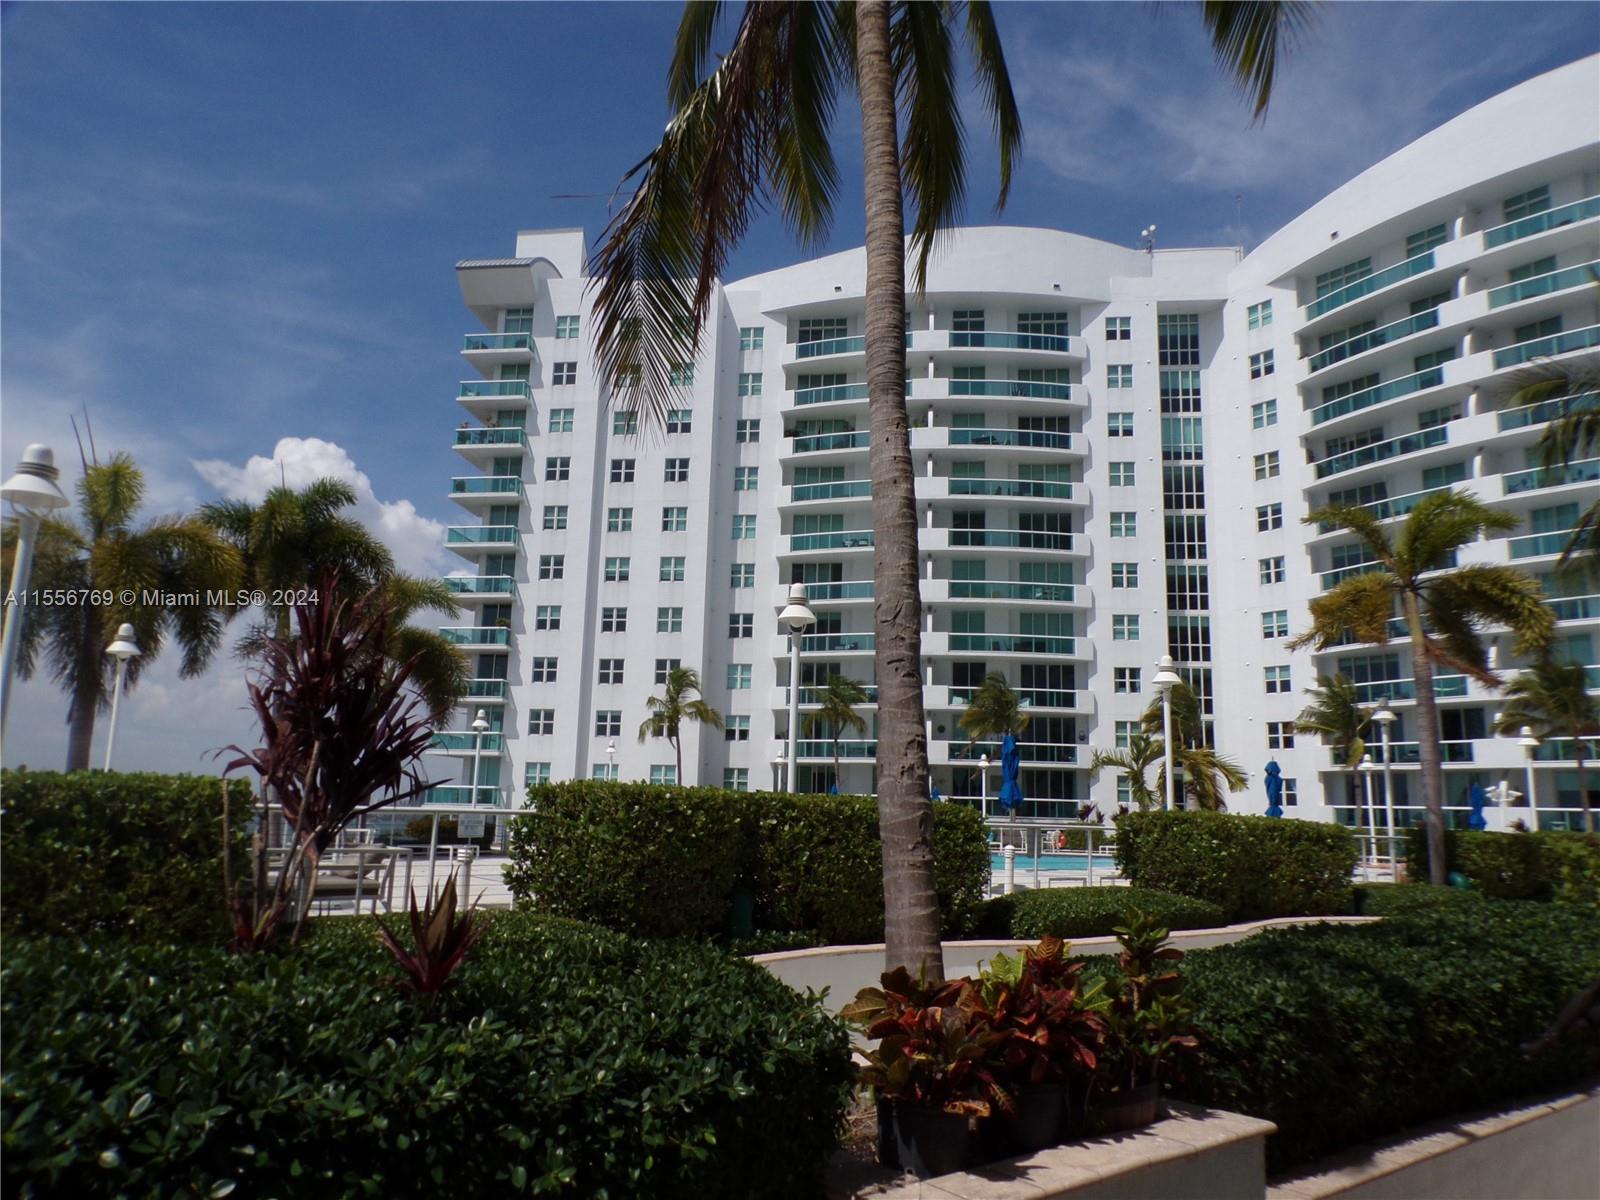 7900  Harbor Island Dr #509 For Sale A11556769, FL